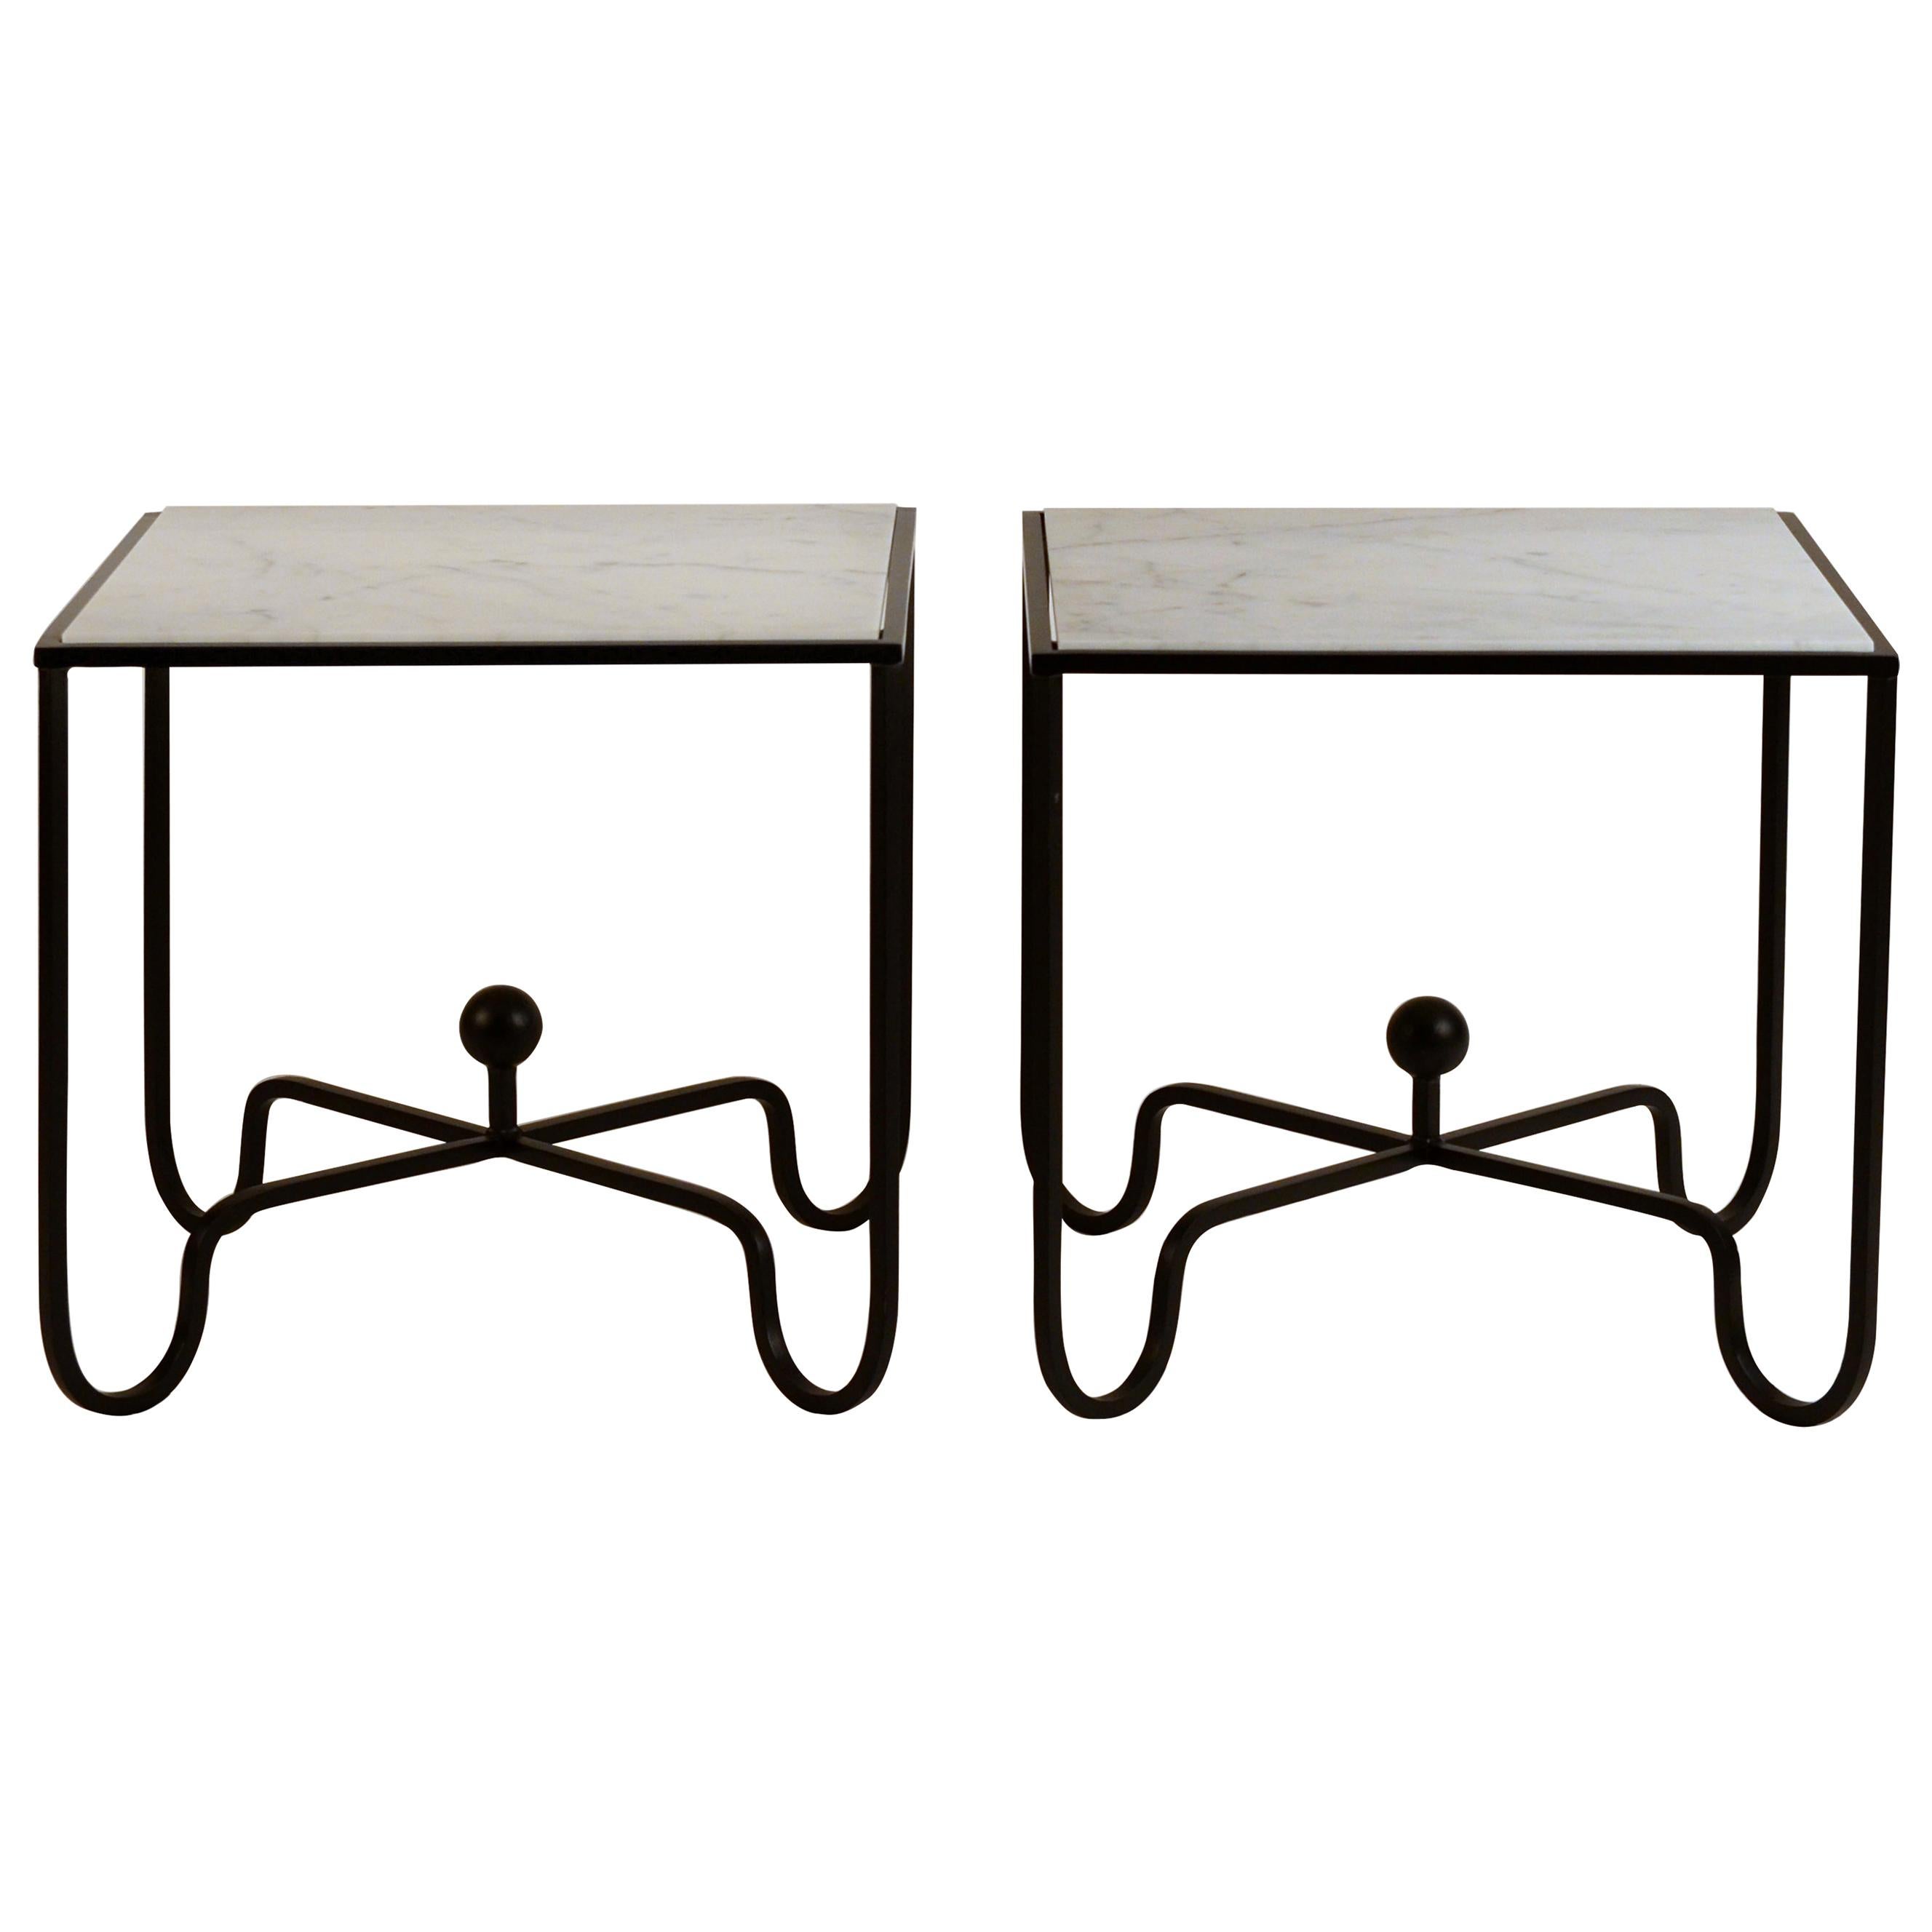 Pair of 'Entretoise' Wrought Iron and Honed Marble Side Tables by Design Frères For Sale